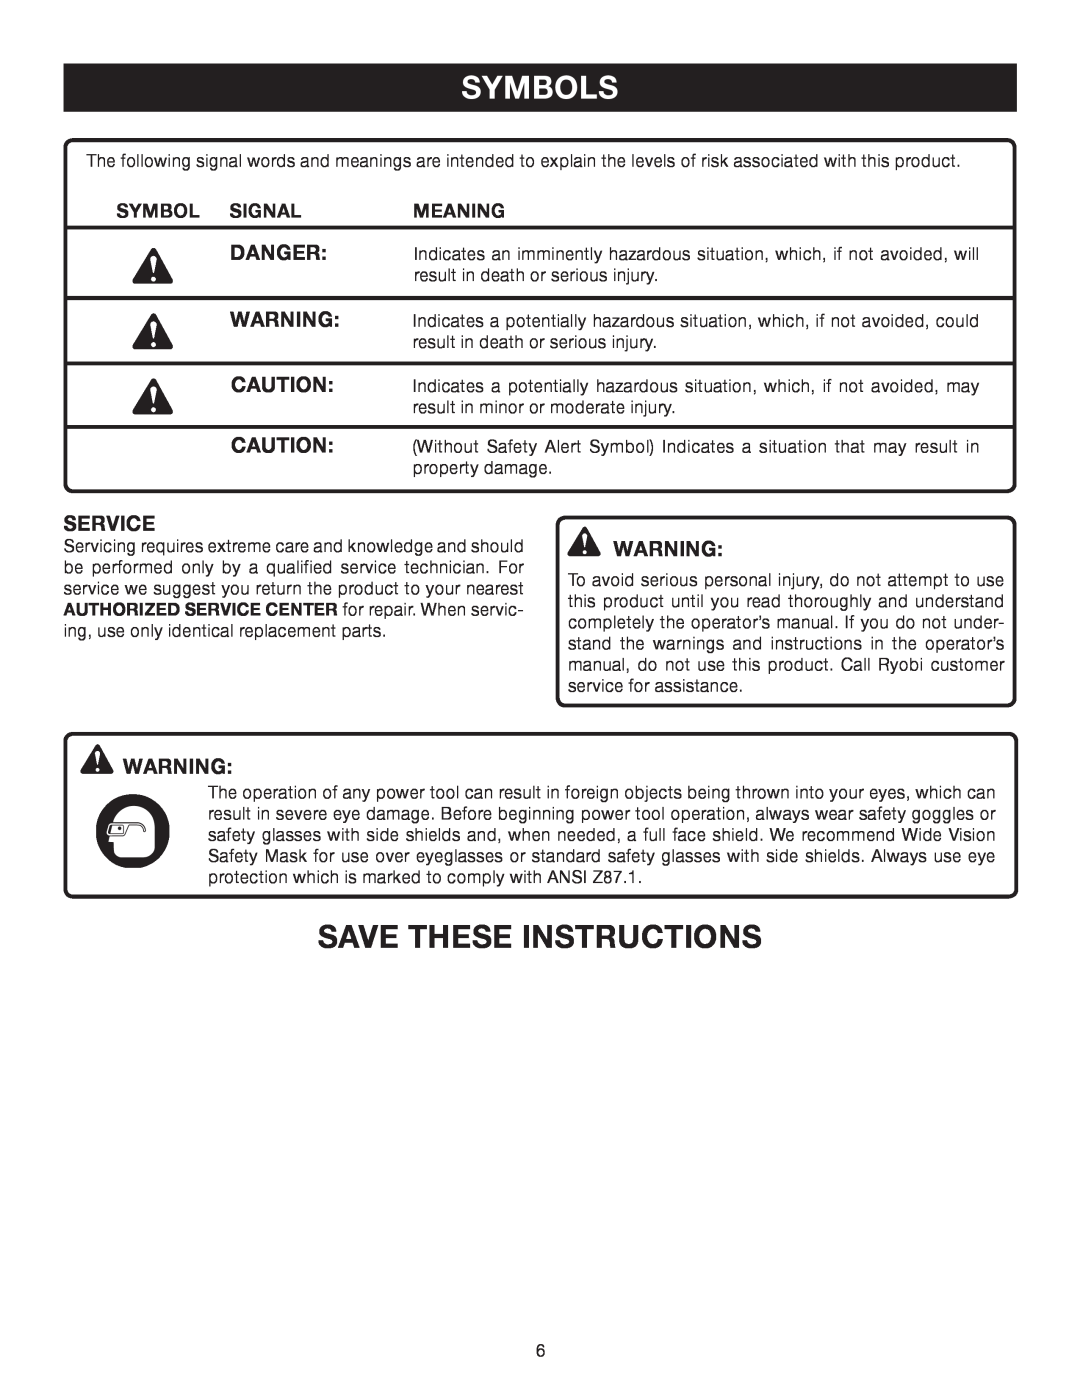 Ryobi Outdoor RY46501B manual Save These Instructions, Service, Symbols, Symbol Signal, Meaning 